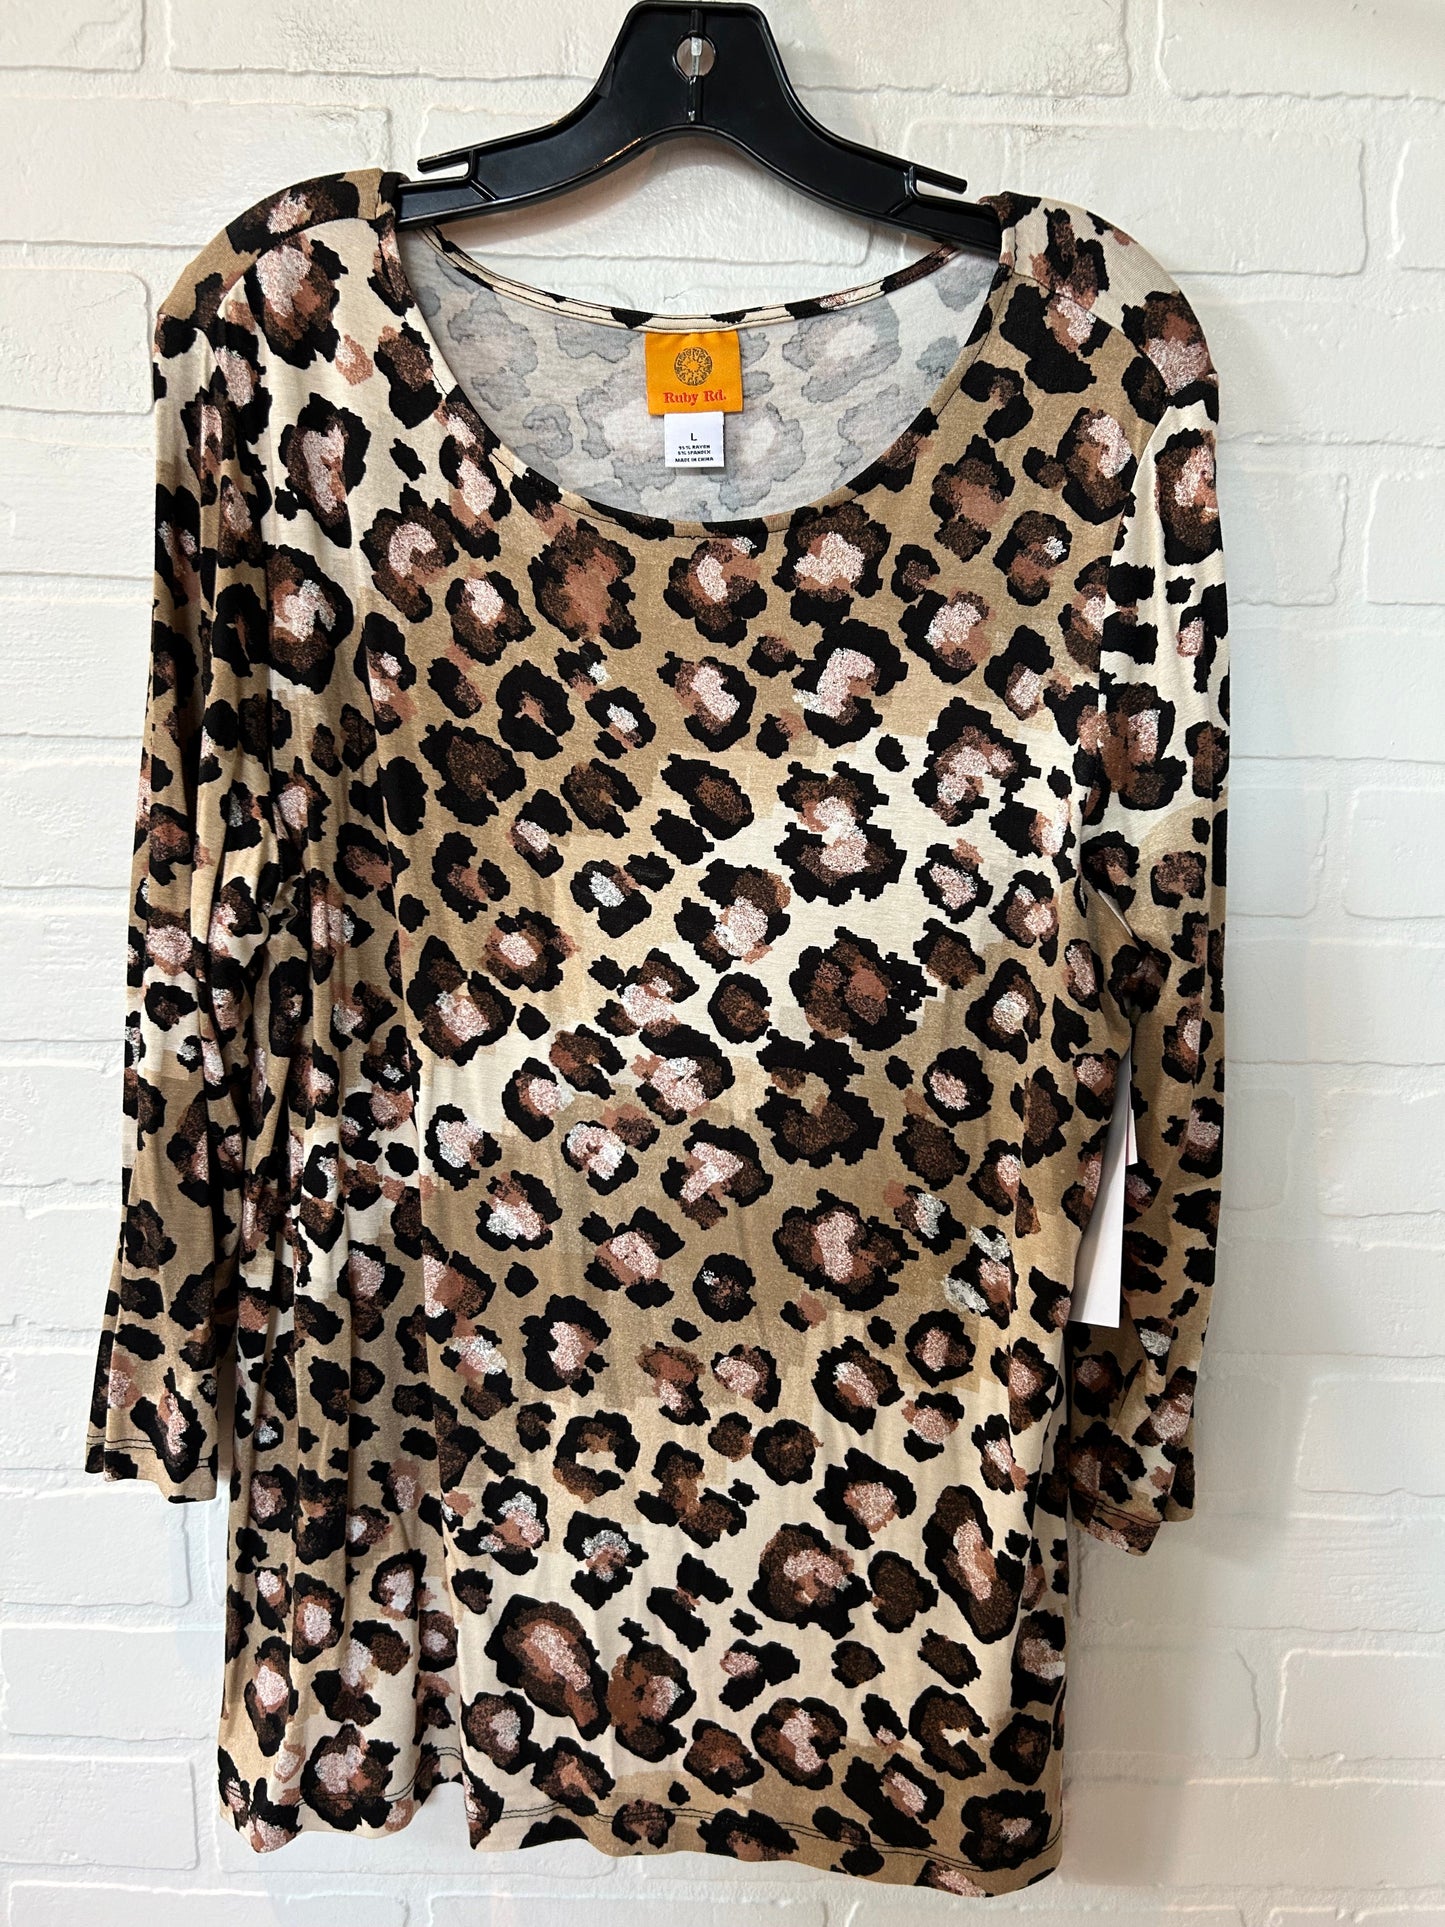 Animal Print Top 3/4 Sleeve Ruby Rd, Size L